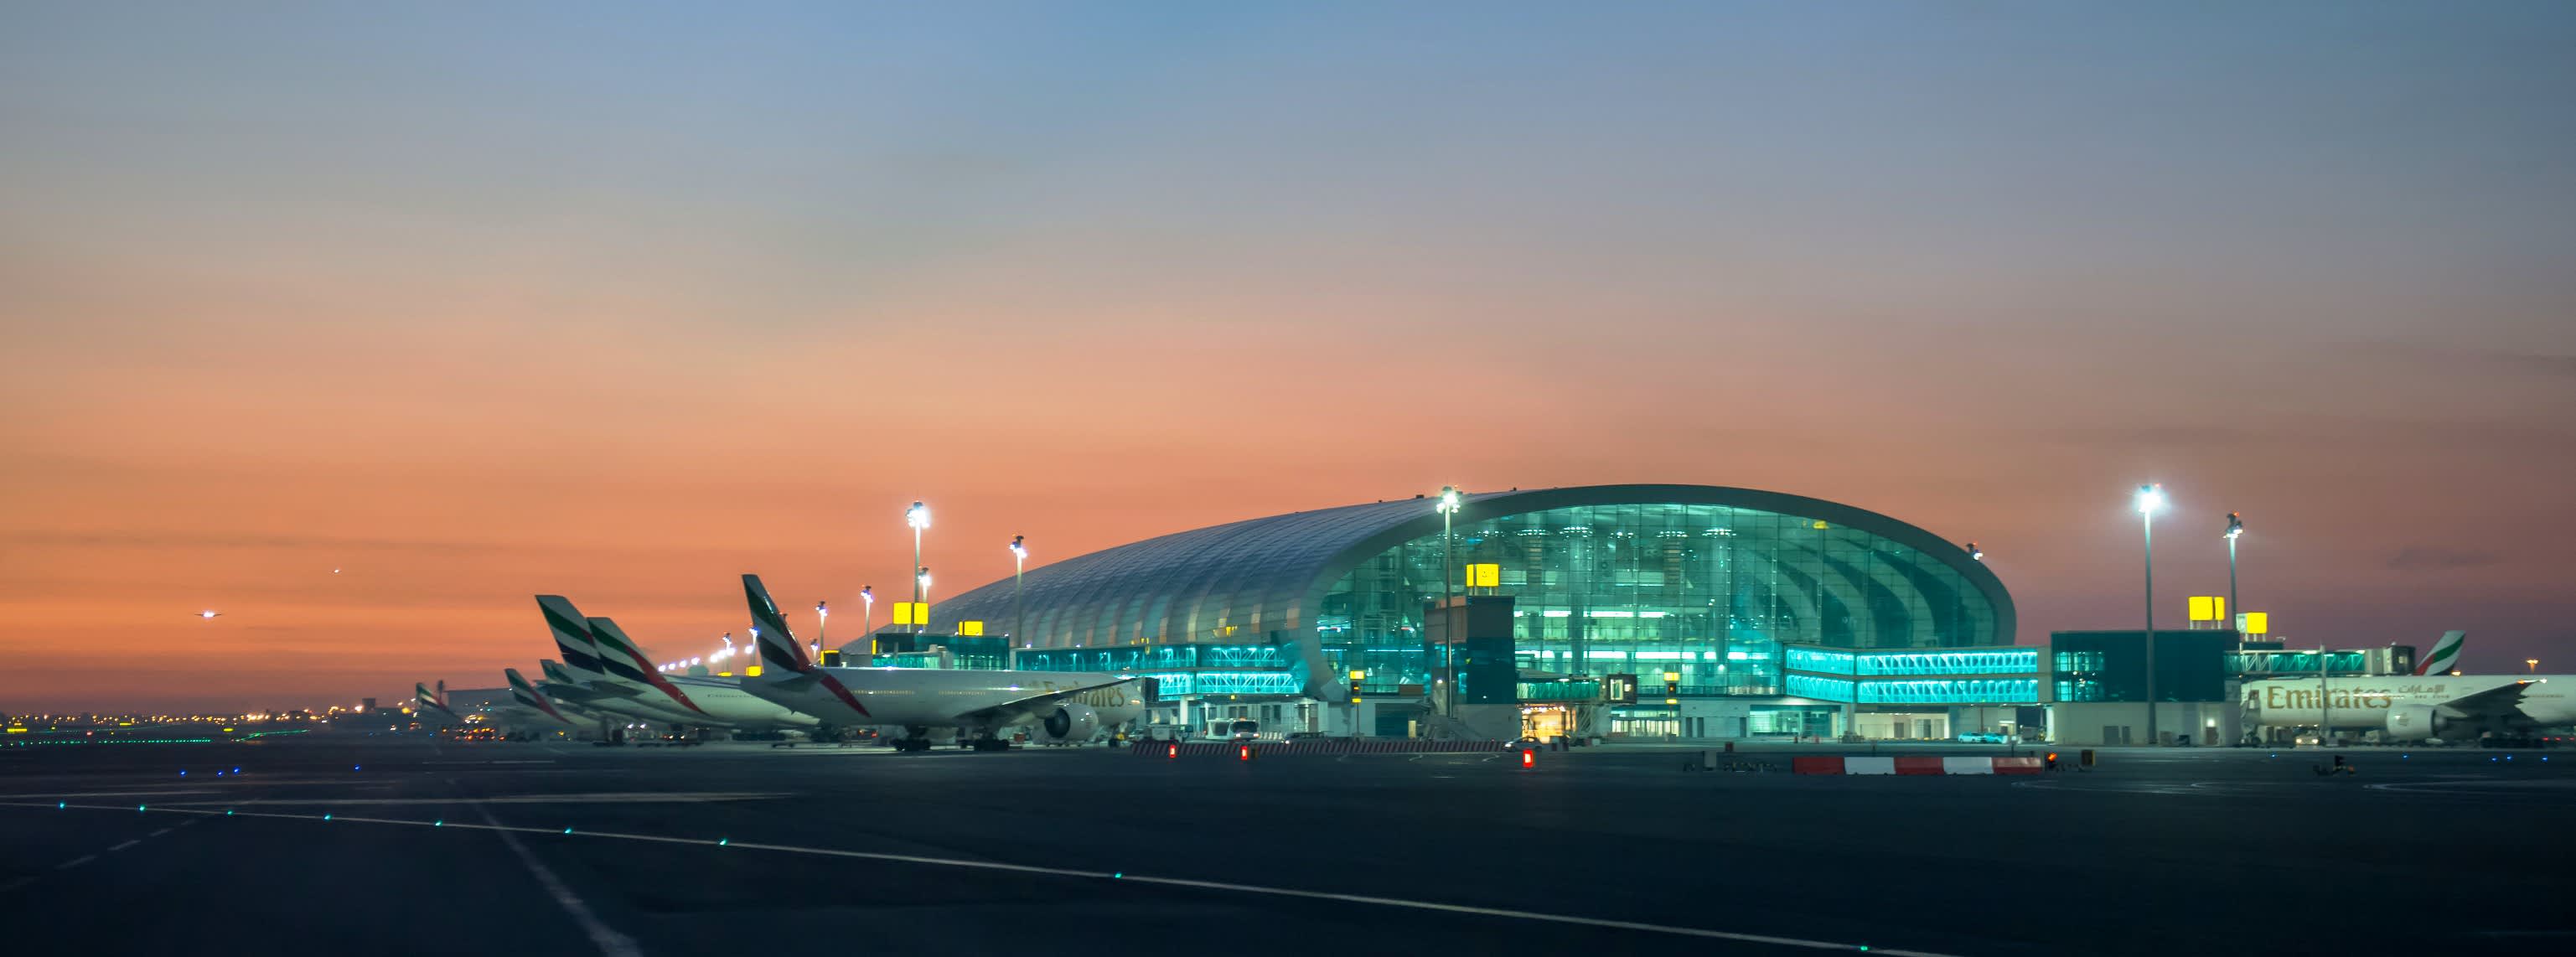 Dubai Airport Opens World's First Airbus A380 Concourse